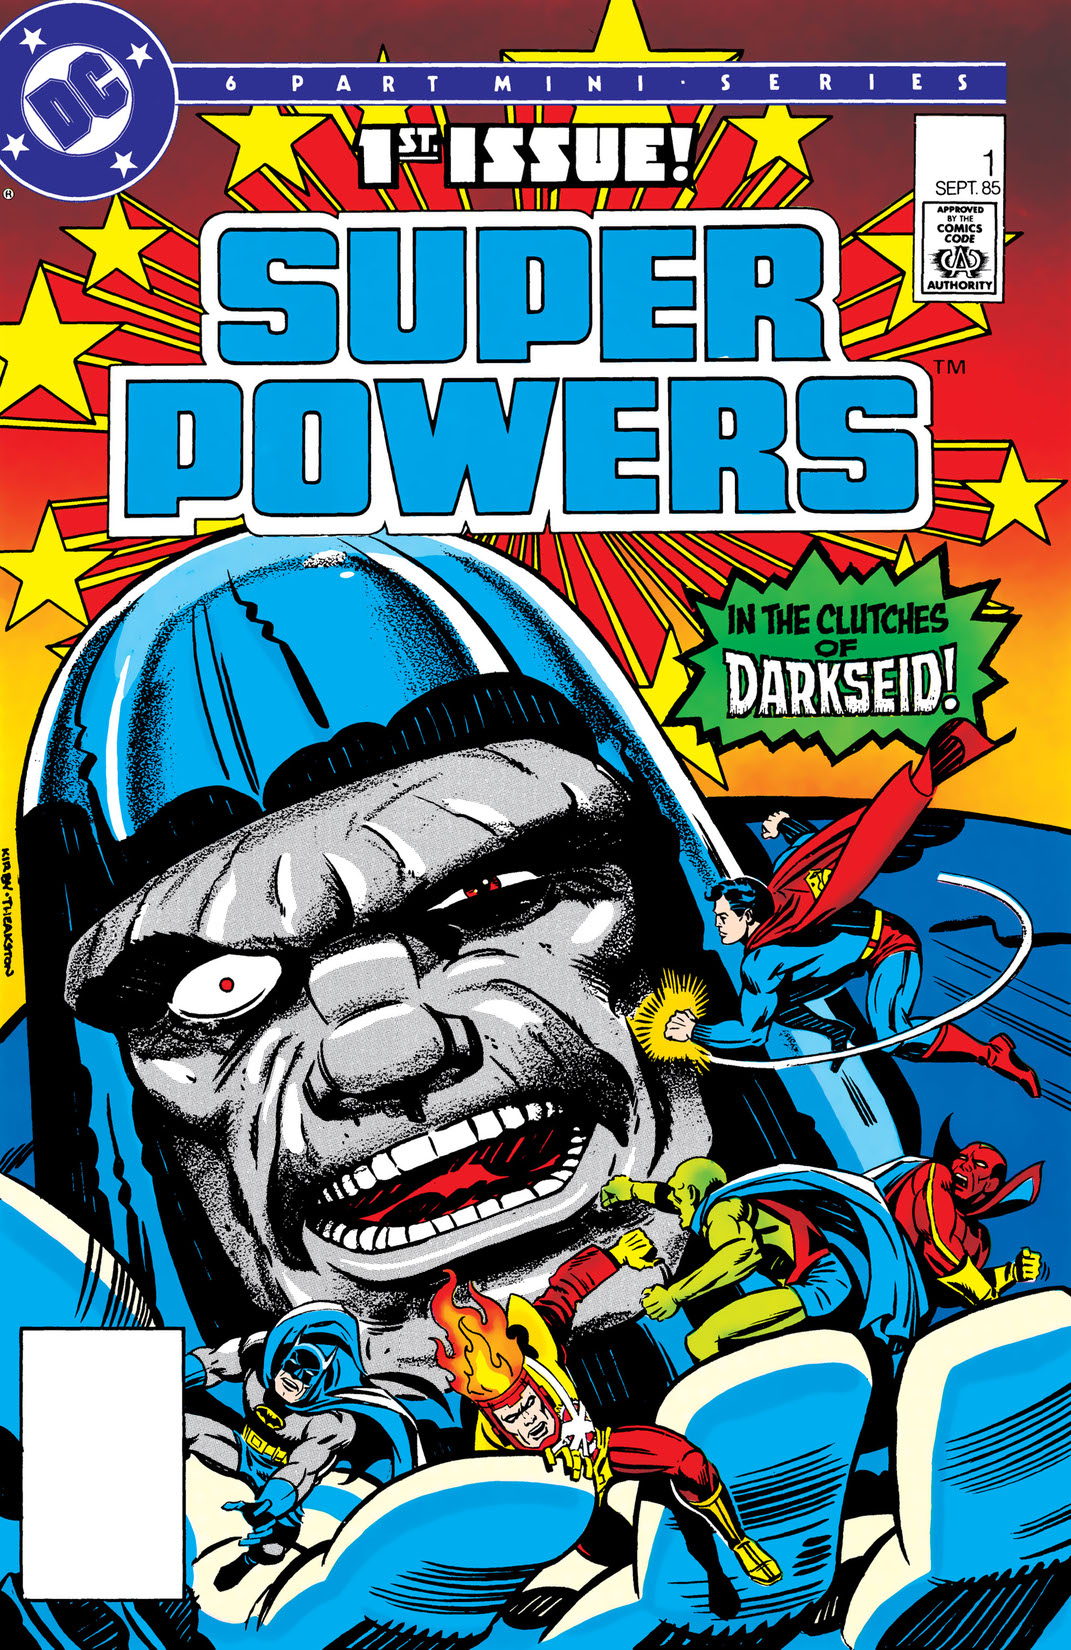 Super Powers (1985-) #1 preview images